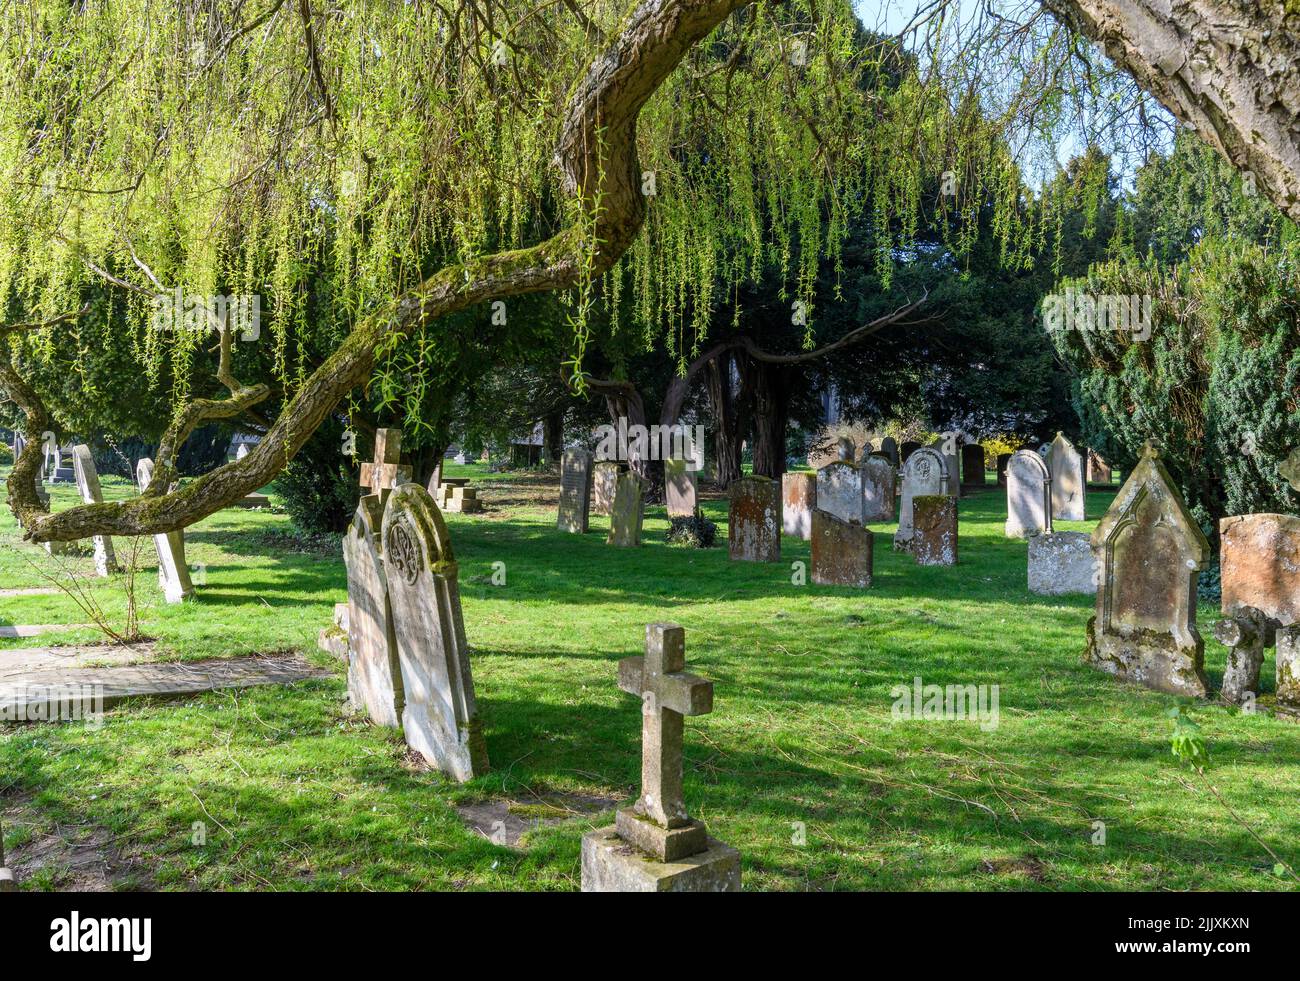 Cemetary at Church of the Holy trinity, Stratford-upon-Avon, Warwickshire, West Midlands, England. Stock Photo